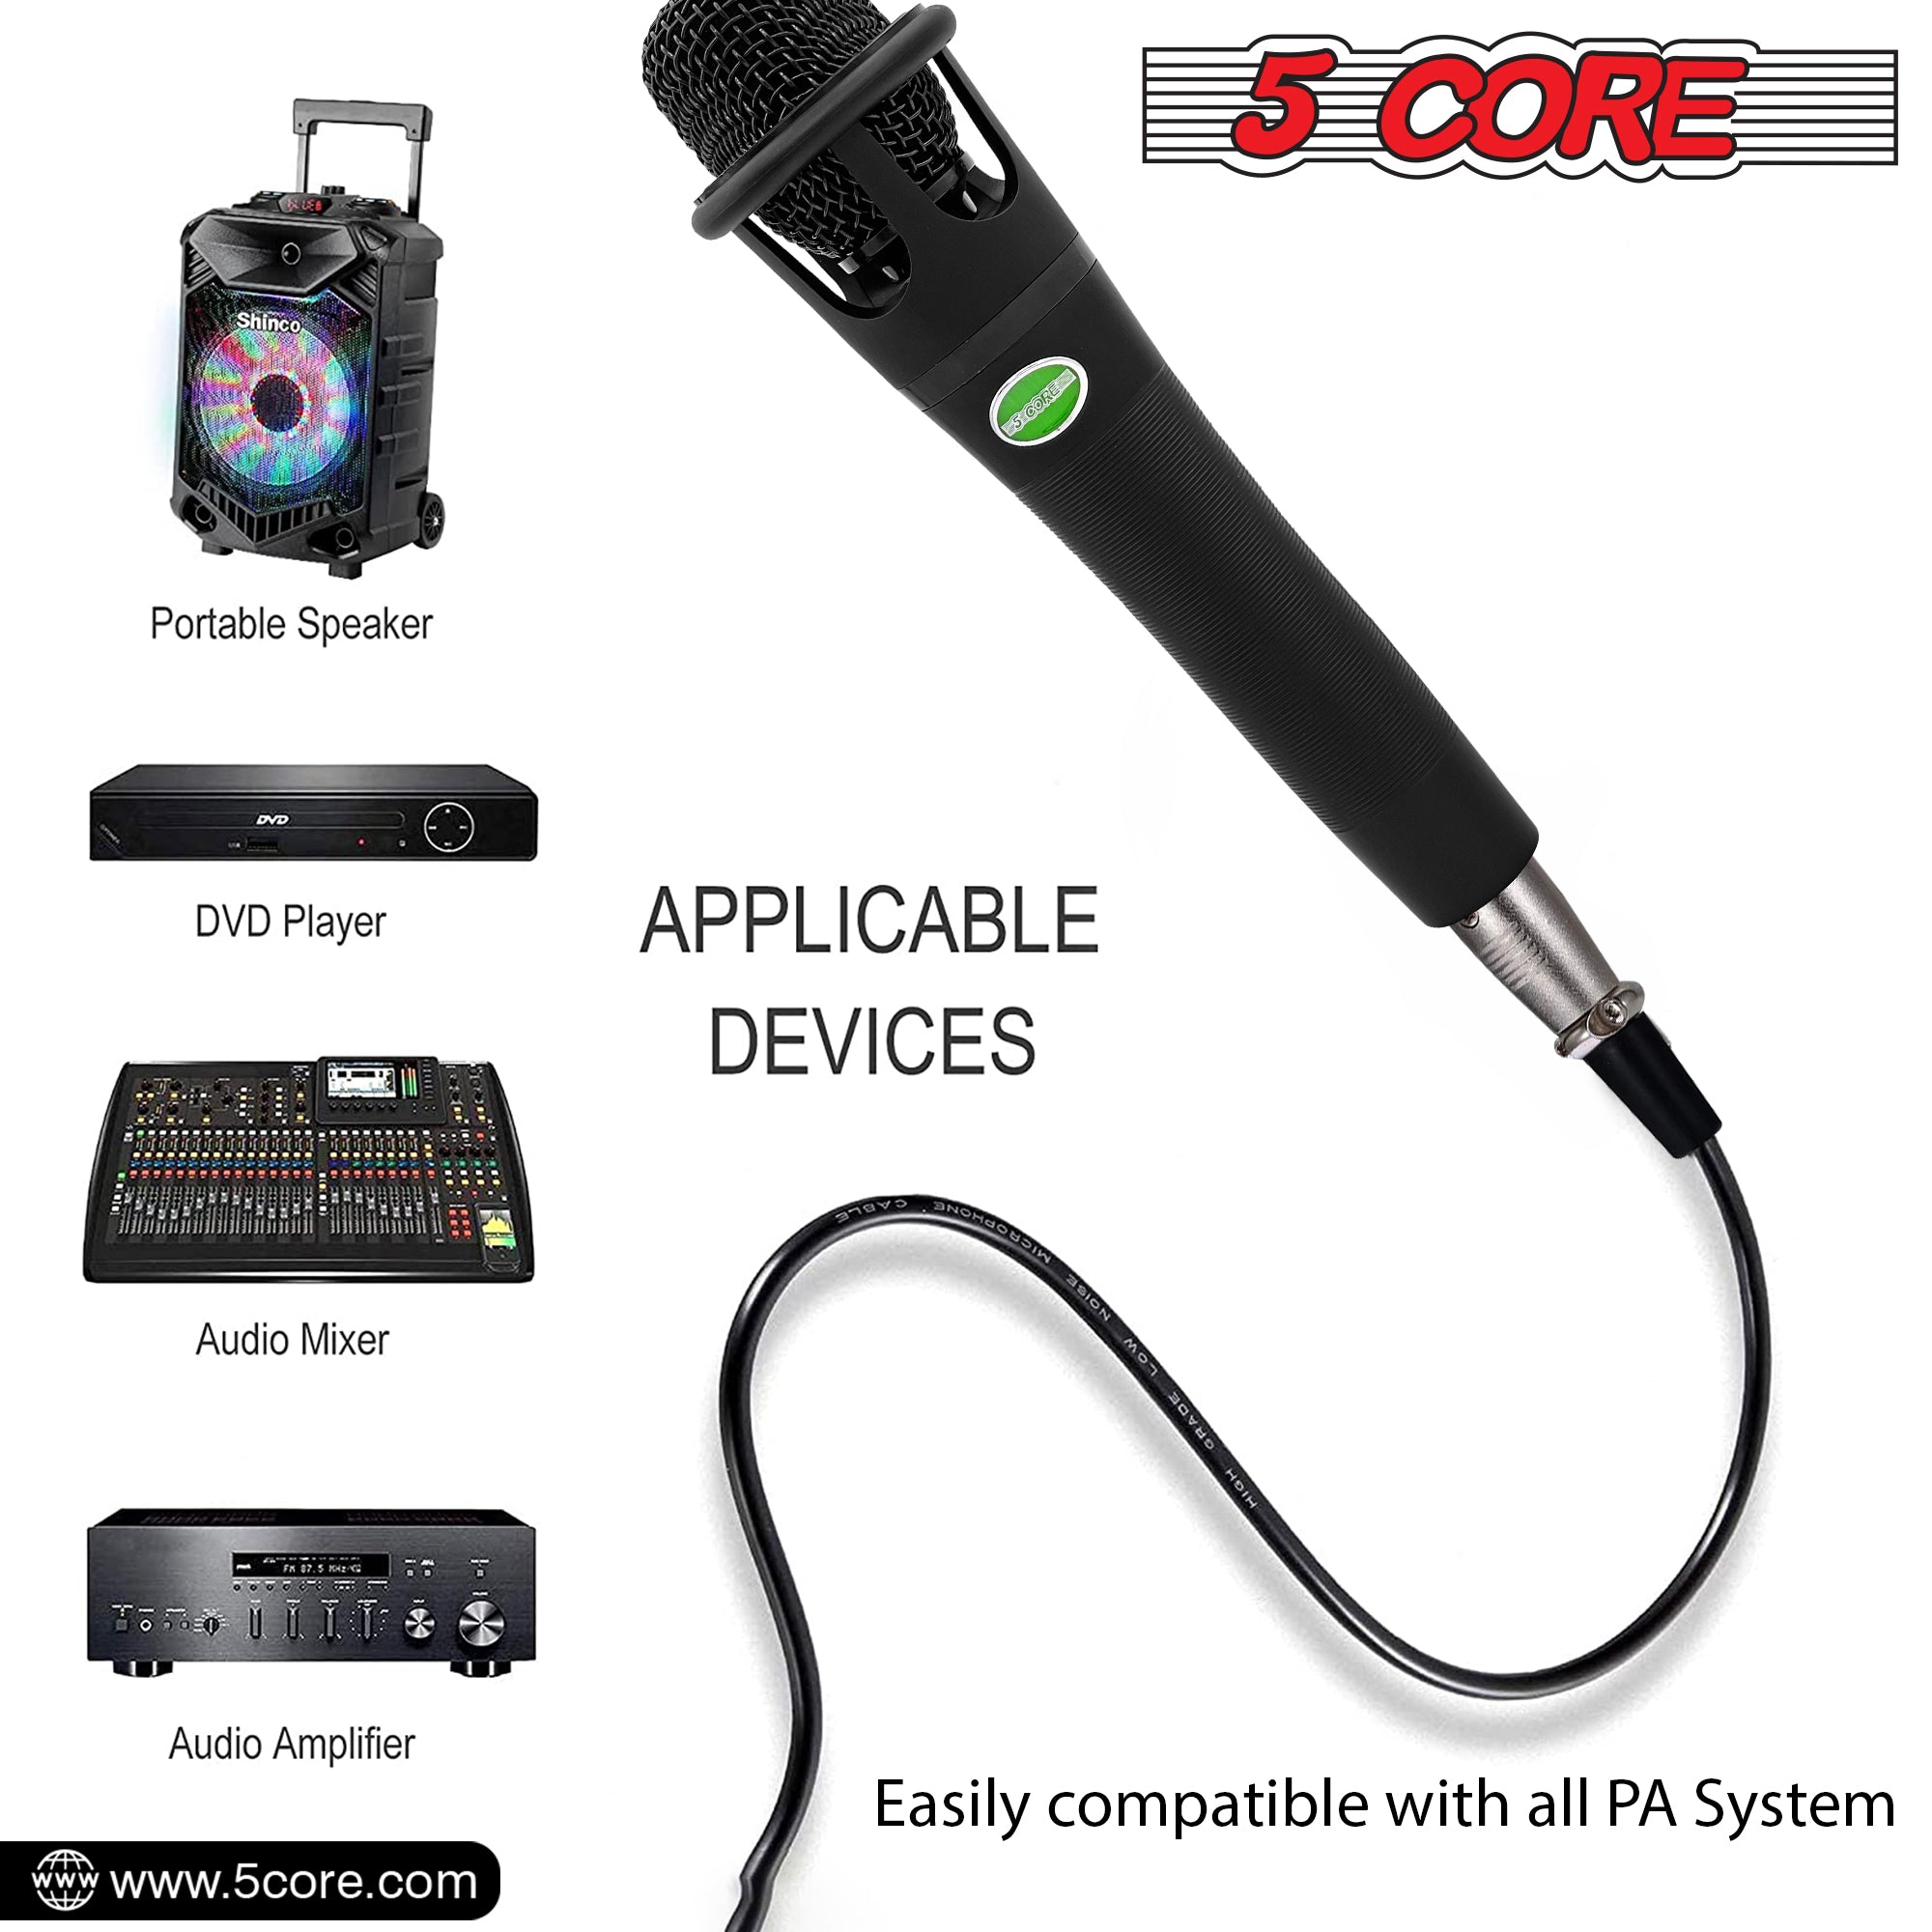 5 Core Microphone 1 Piece Black Karaoke XLR Wired Professional Dynamic w Integrated Pop Filter Cardioid Unidirectional Pickup Handheld Micrófono for Singing DJ Podcast Speeches Includes Cable Mic Holder Mini Tripod - MIC CROWN